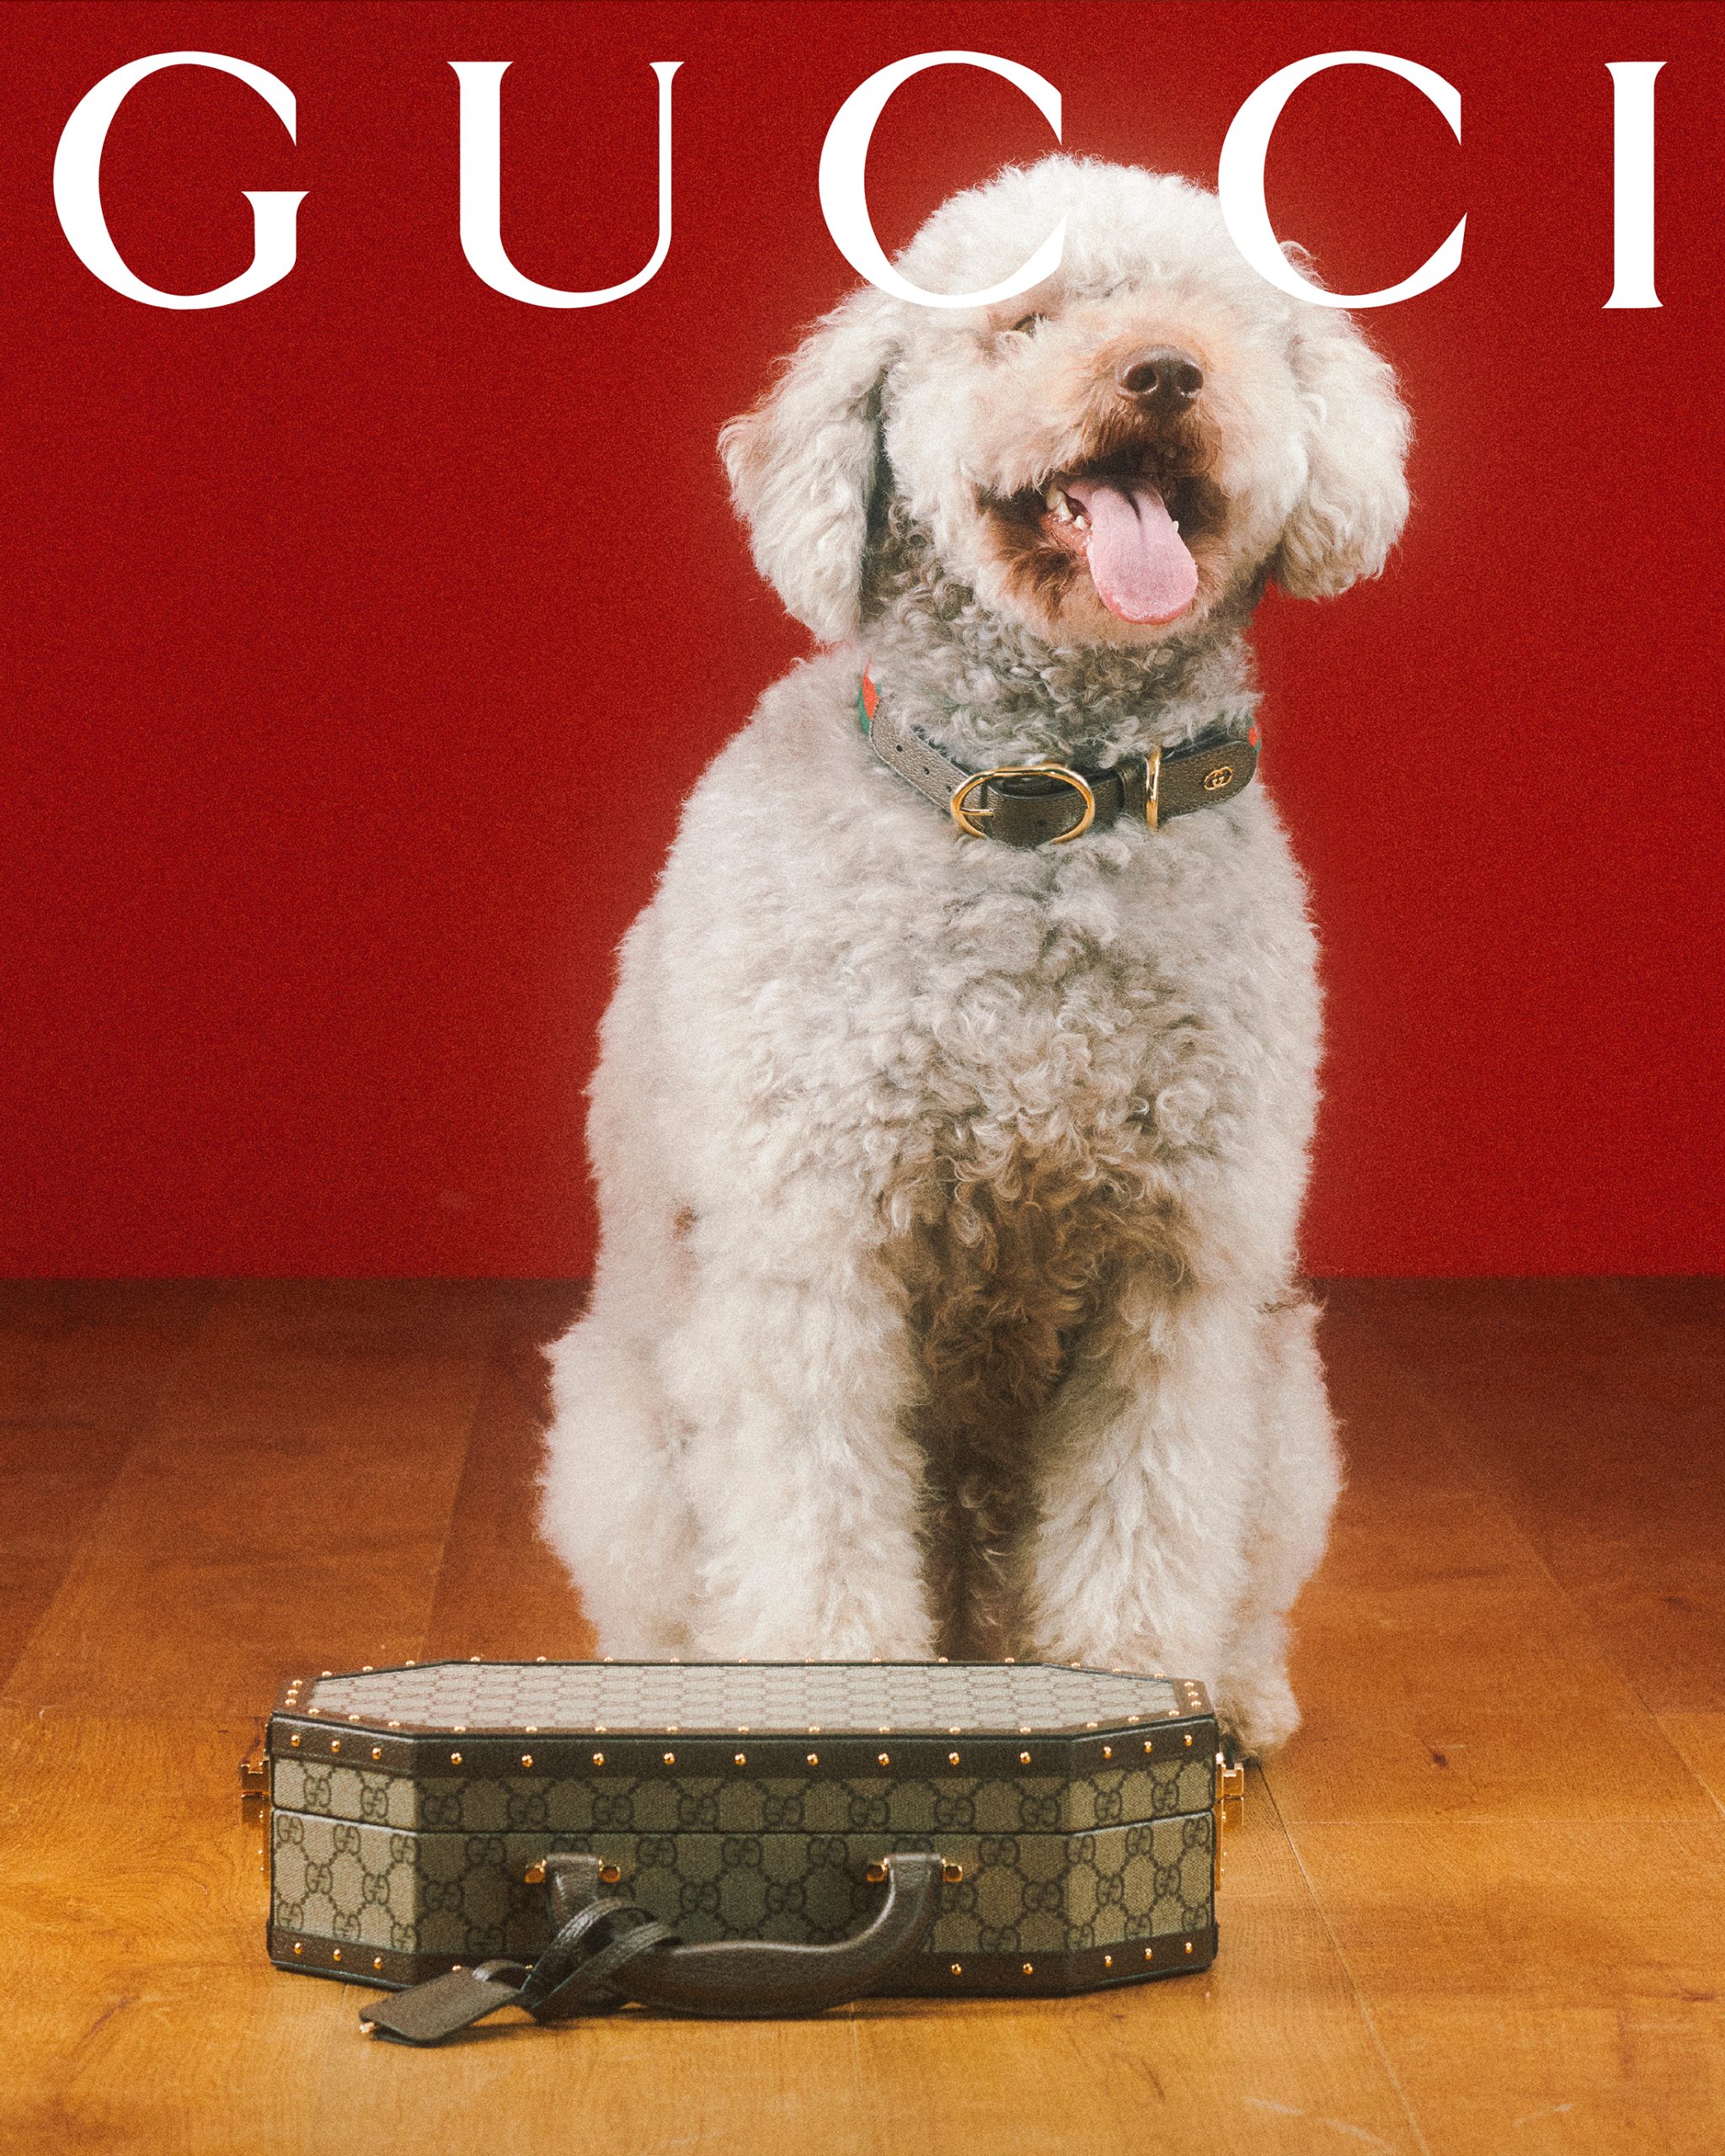 The article: UNVEILING THE GUCCI PET COLLECTION